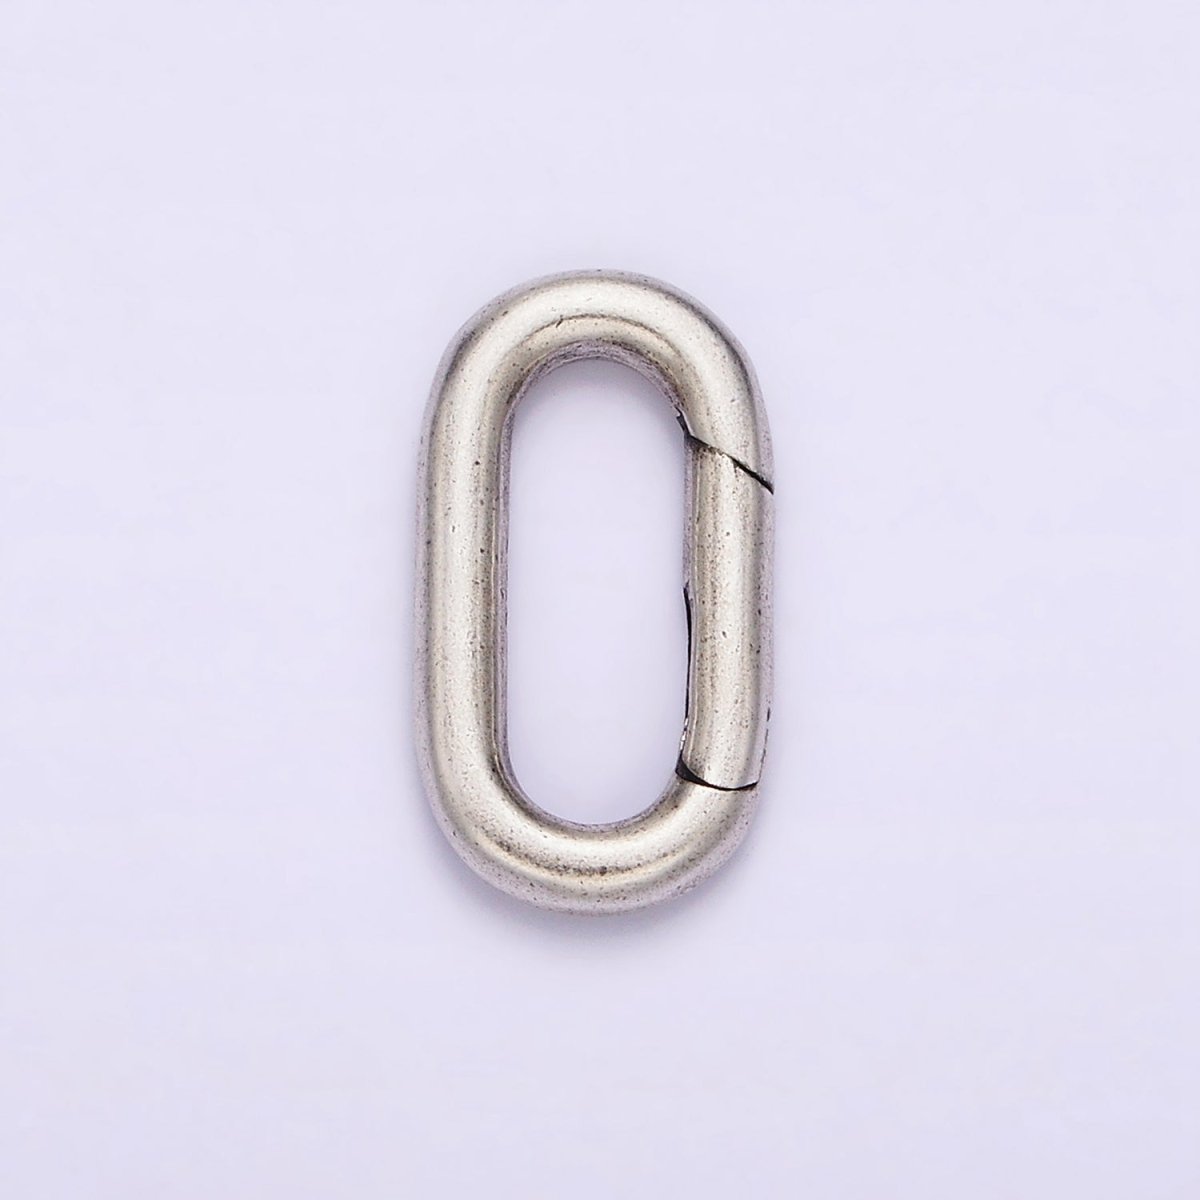 S925 Sterling Silver Hinged Oval Push Gate Ring Clasp Charm Pendants Interchangeable Connectors SL-306 - DLUXCA